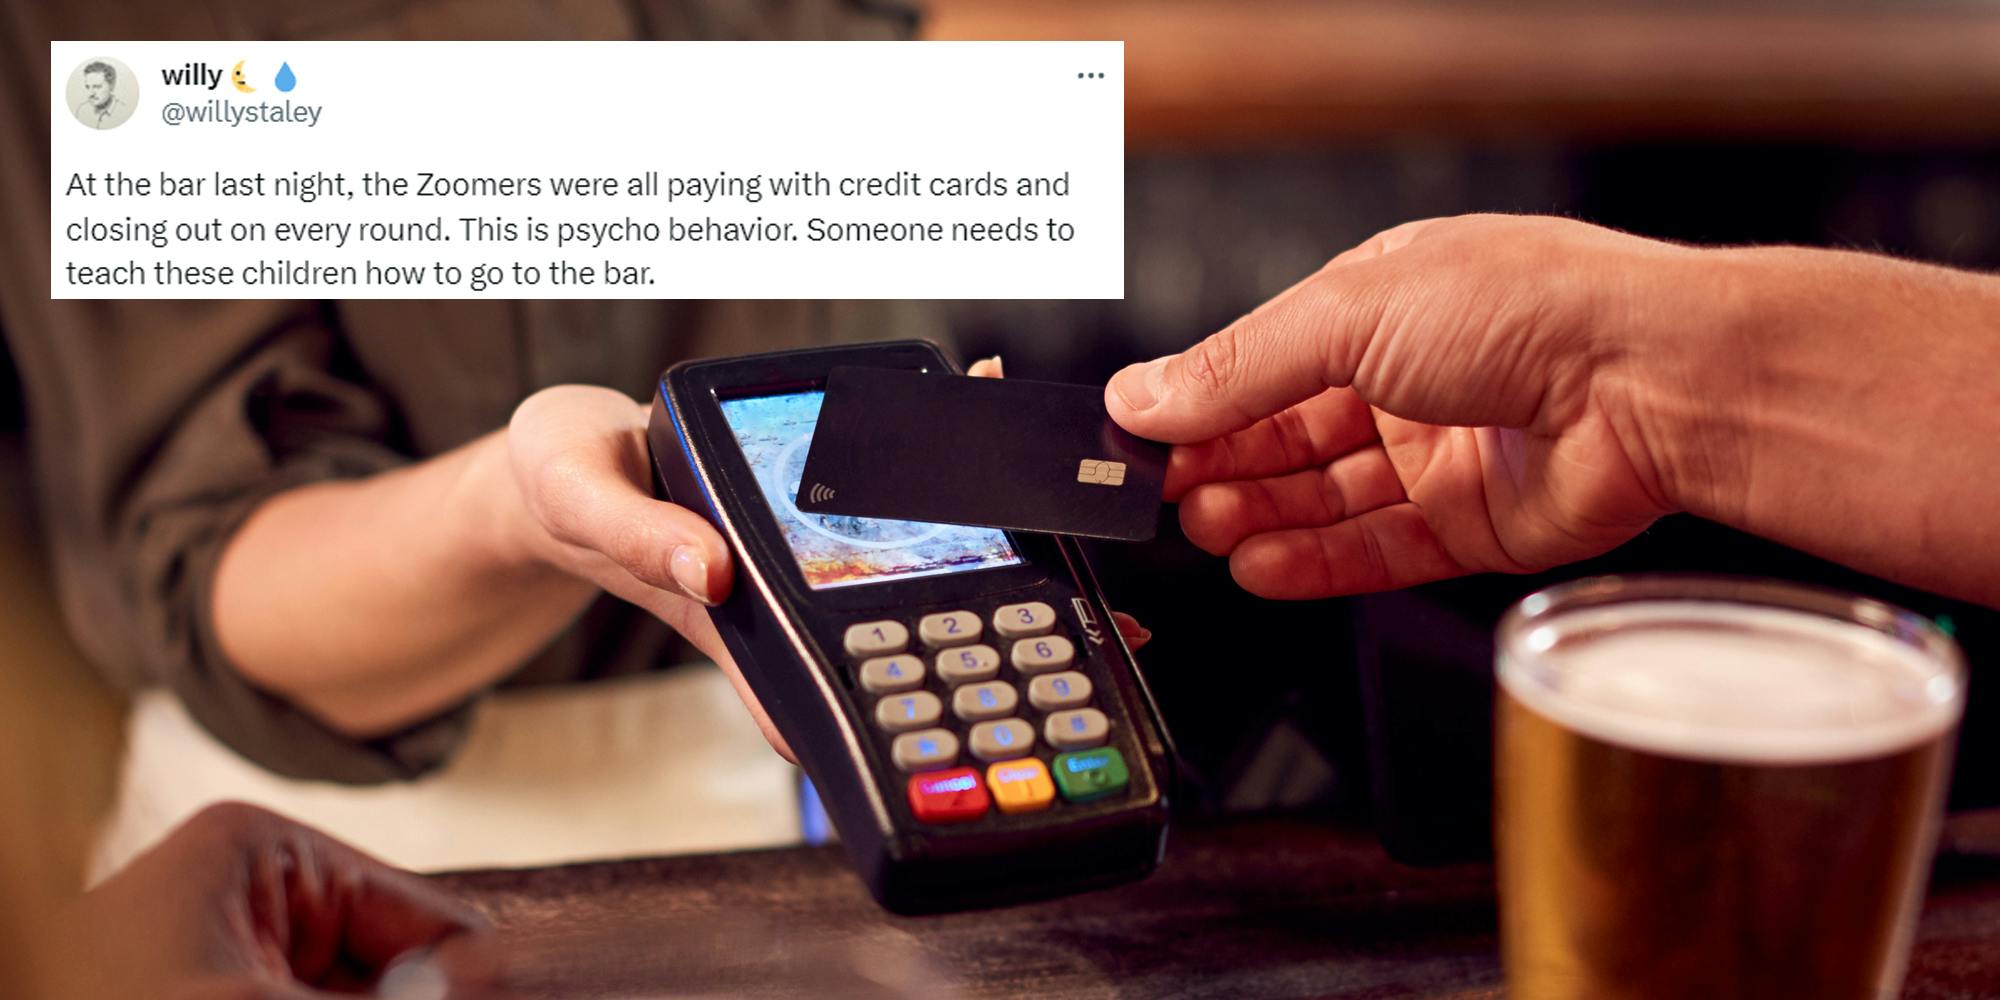 customer paying with card at bar with Tweet by willy in top left corner "At the bar last night, the Zoomers were all paying with credit cards and closing out on every round. This is psycho behavior. Someone teach these children how to go to the bar."